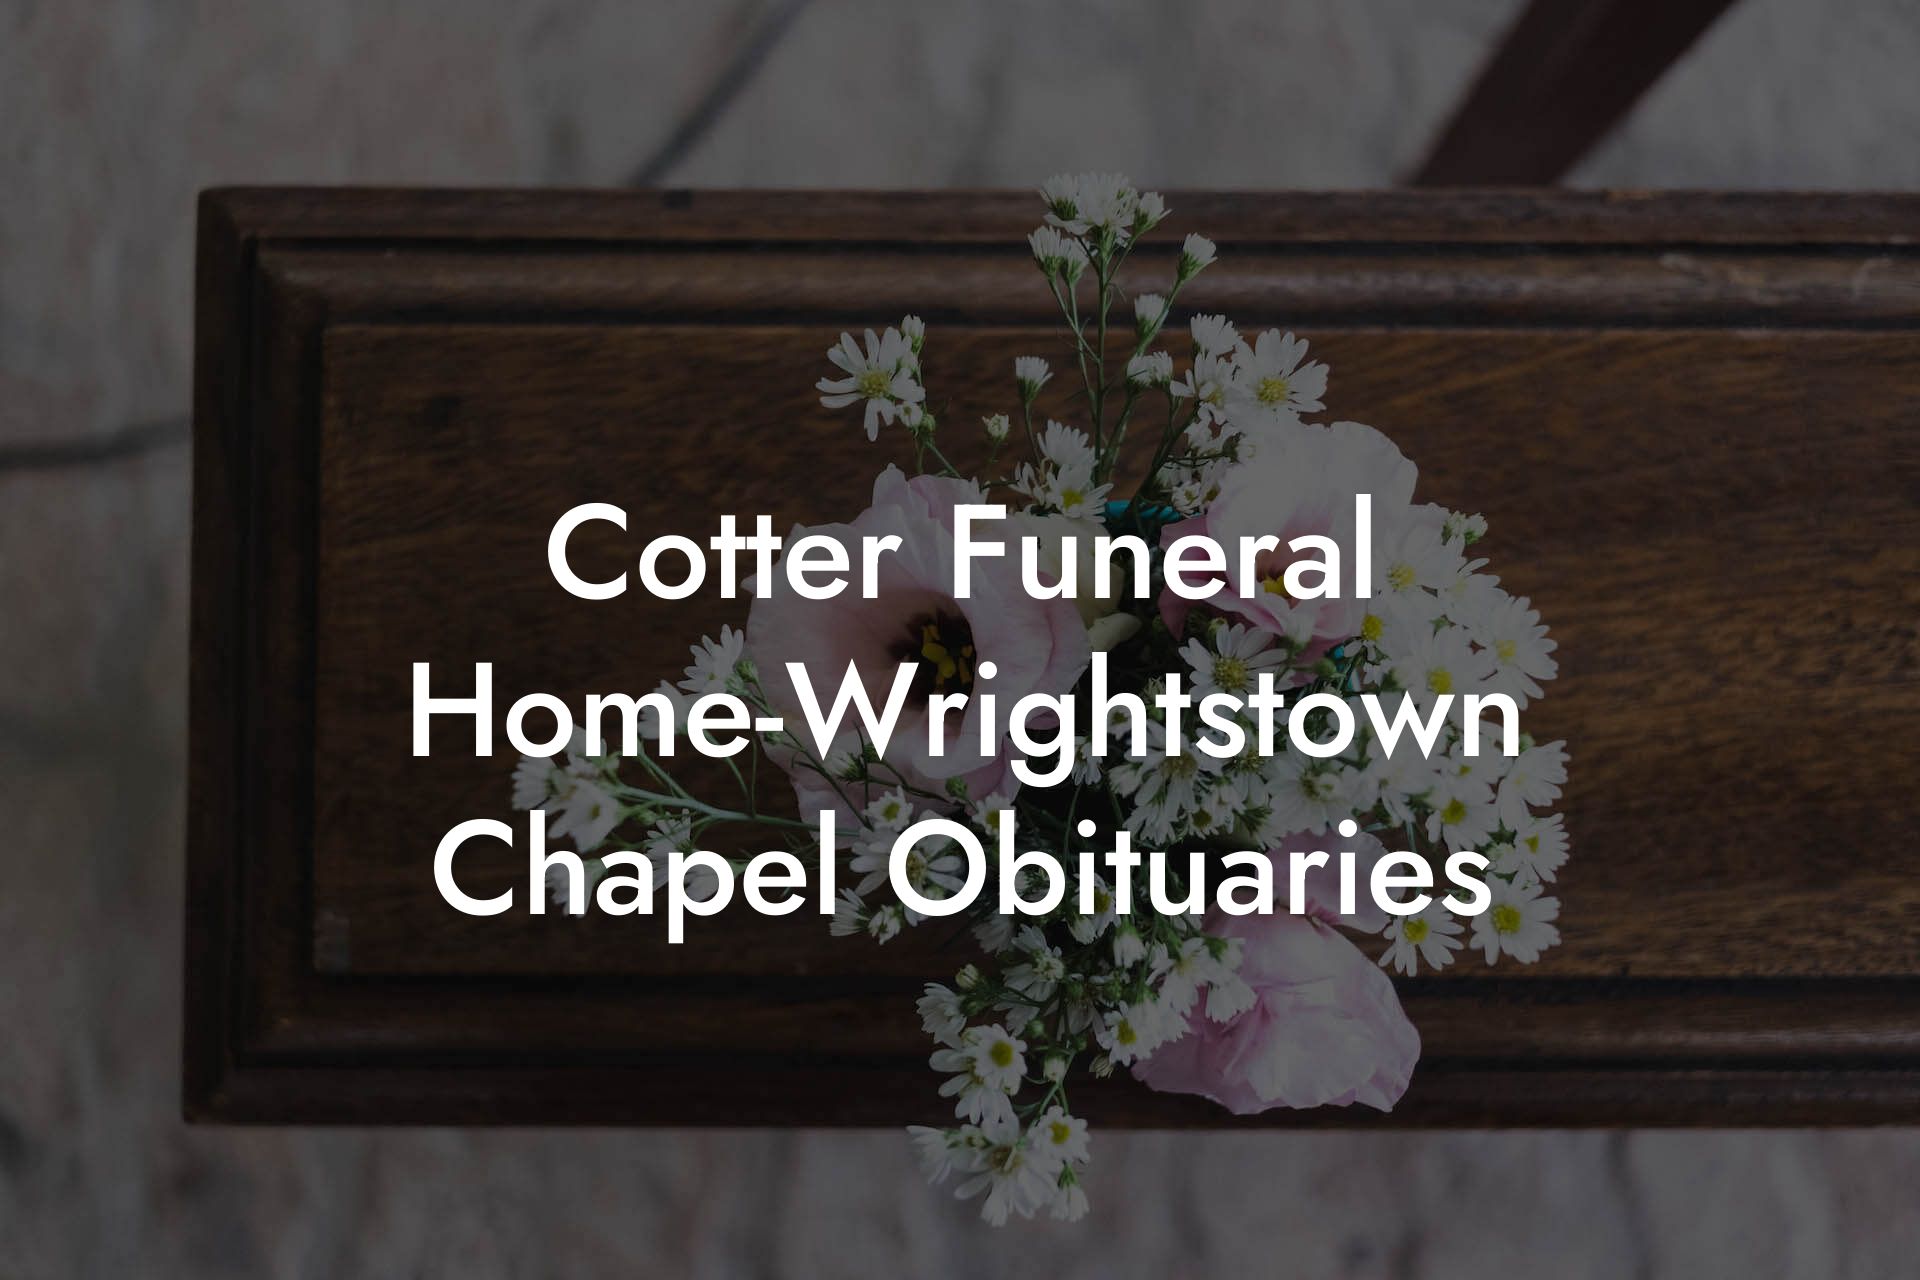 Cotter Funeral Home-Wrightstown Chapel Obituaries